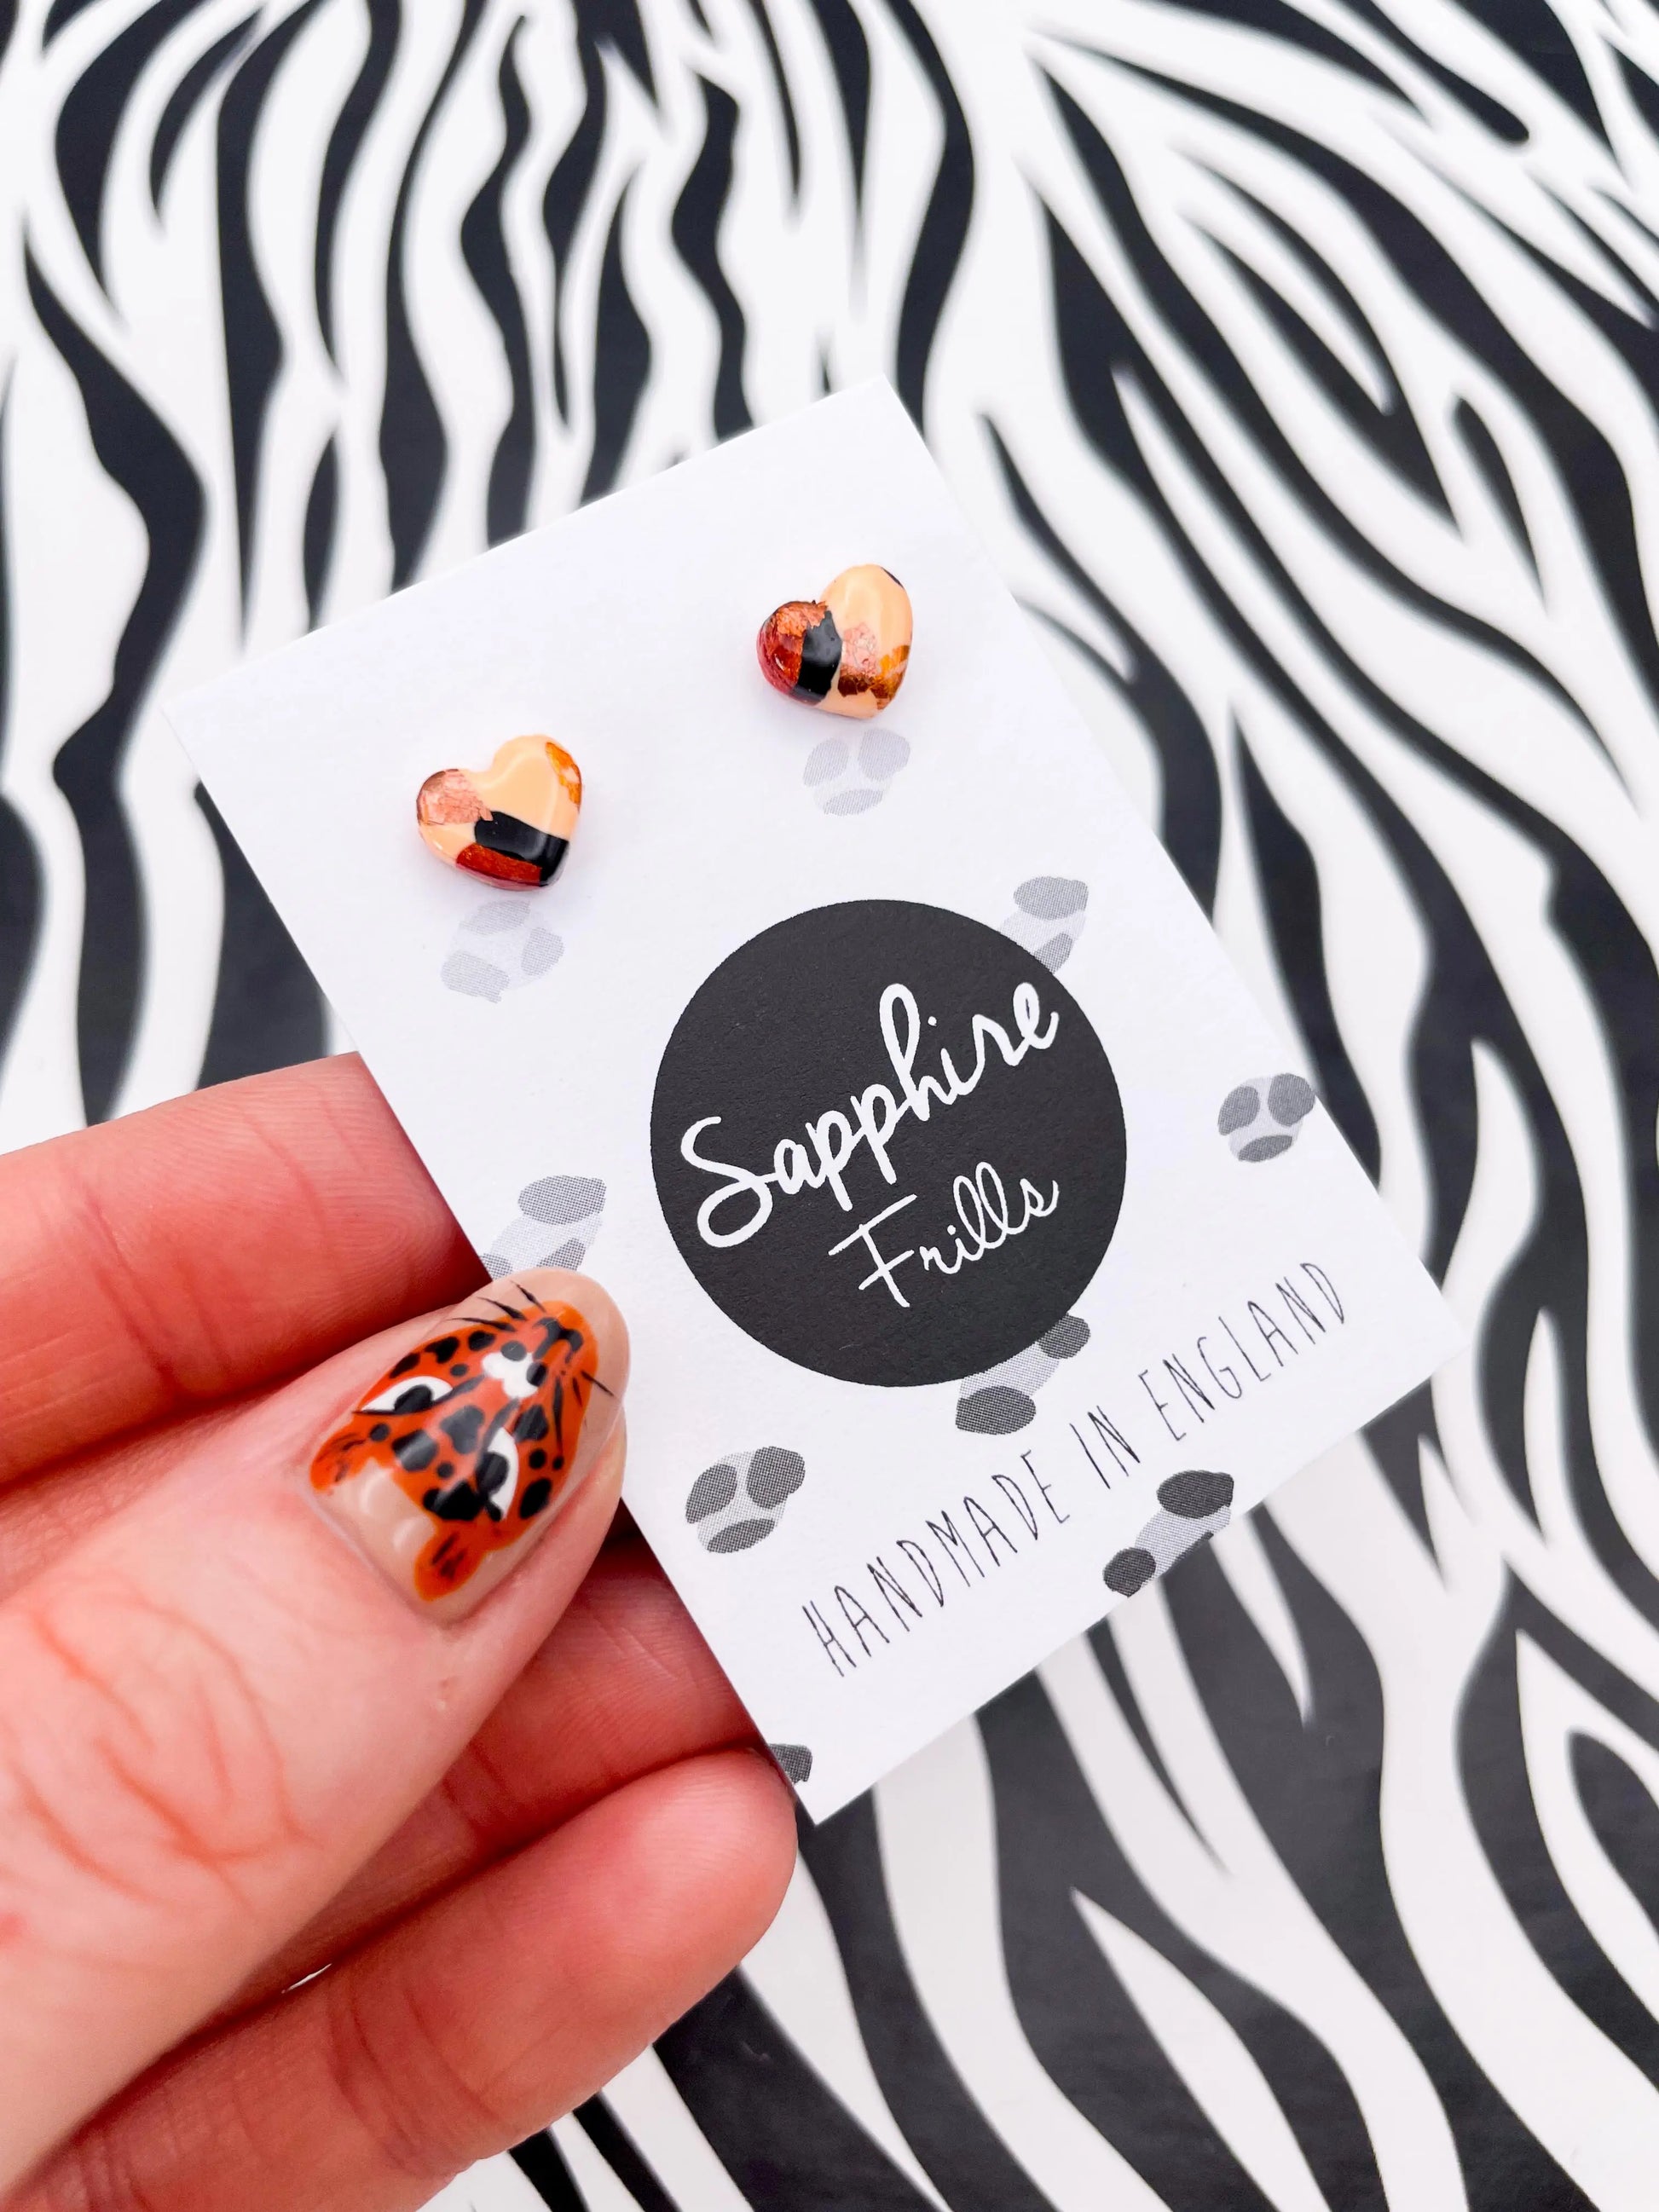 Mini Peach and Copper Leopard Print with Autumn Foil Heart Stud Earrings from Sapphire Frills